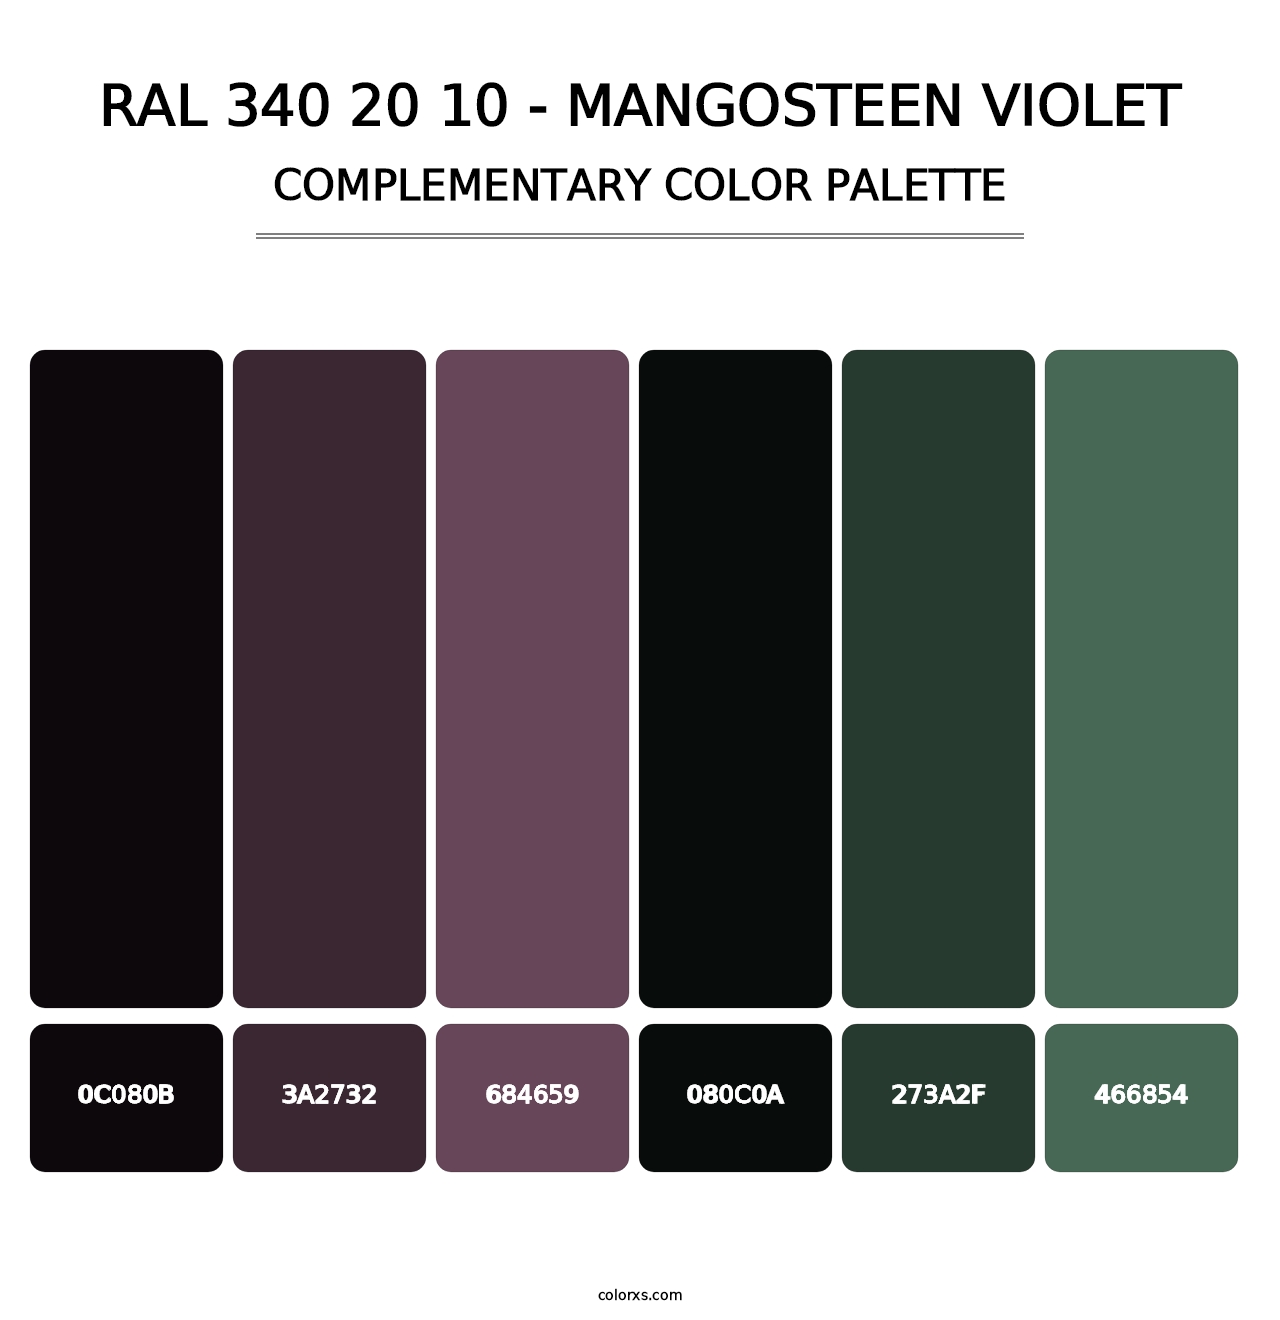 RAL 340 20 10 - Mangosteen Violet - Complementary Color Palette